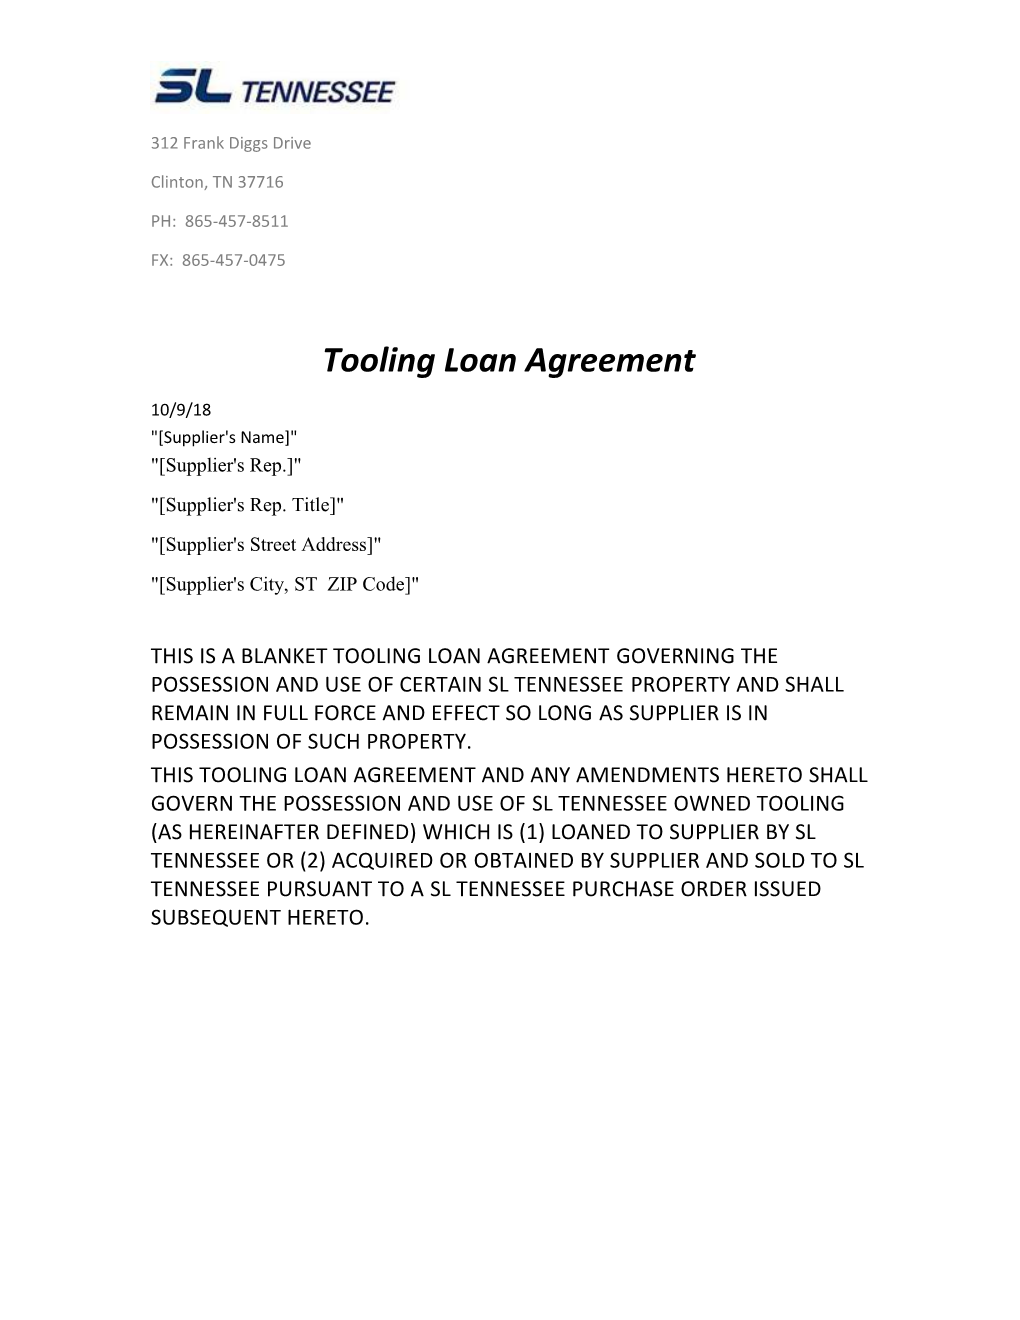 Tooling Loan Agreement